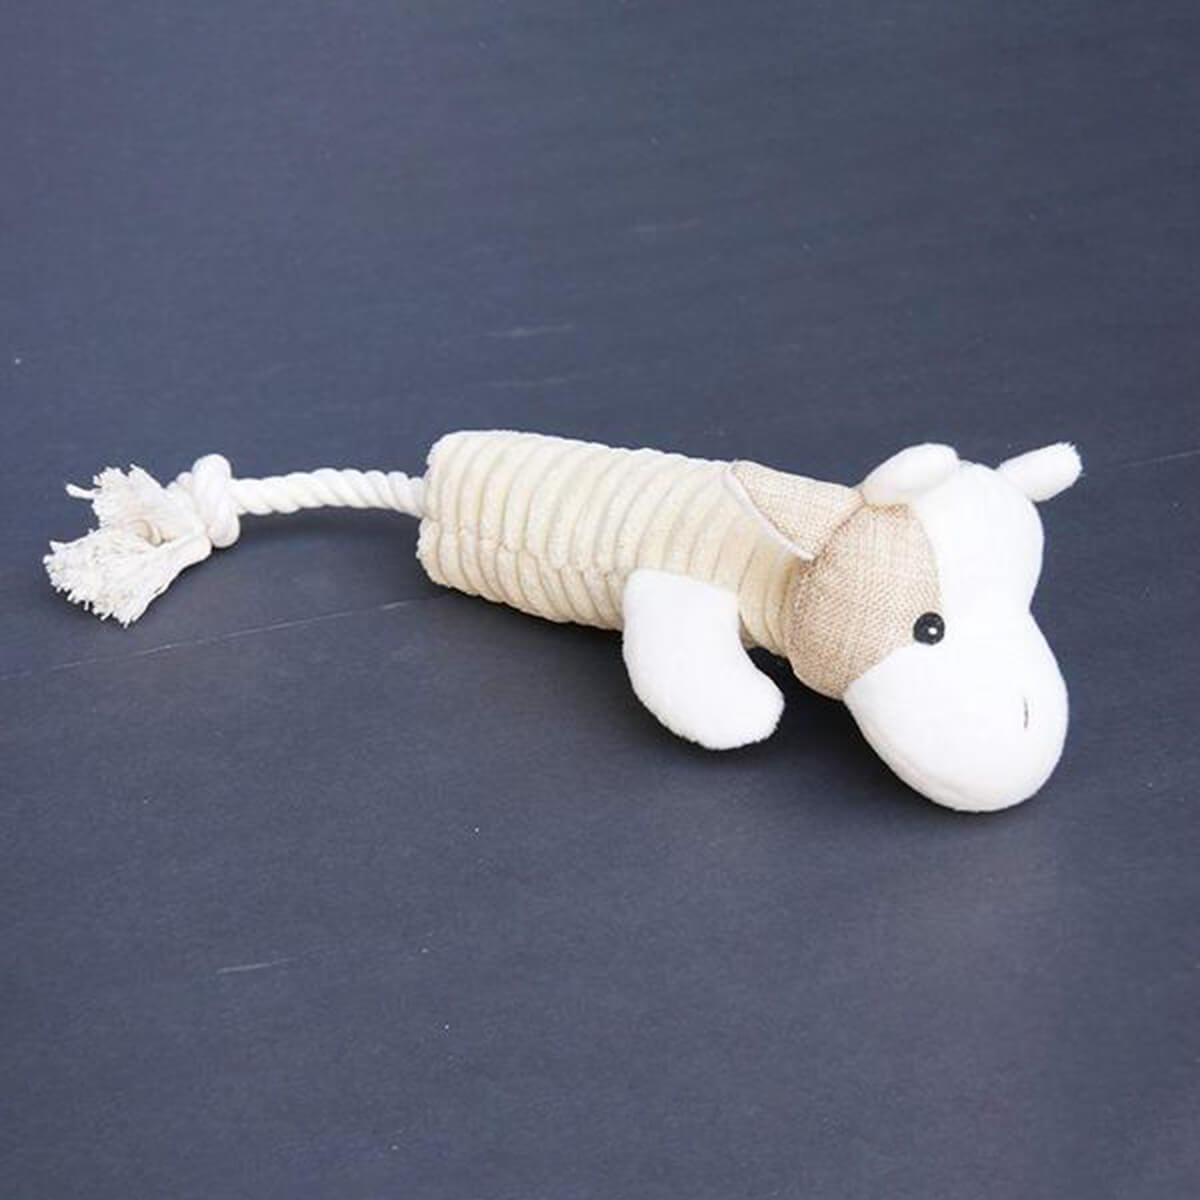 A White Plush Dog Toy With Squeaker with a rope attached to it.